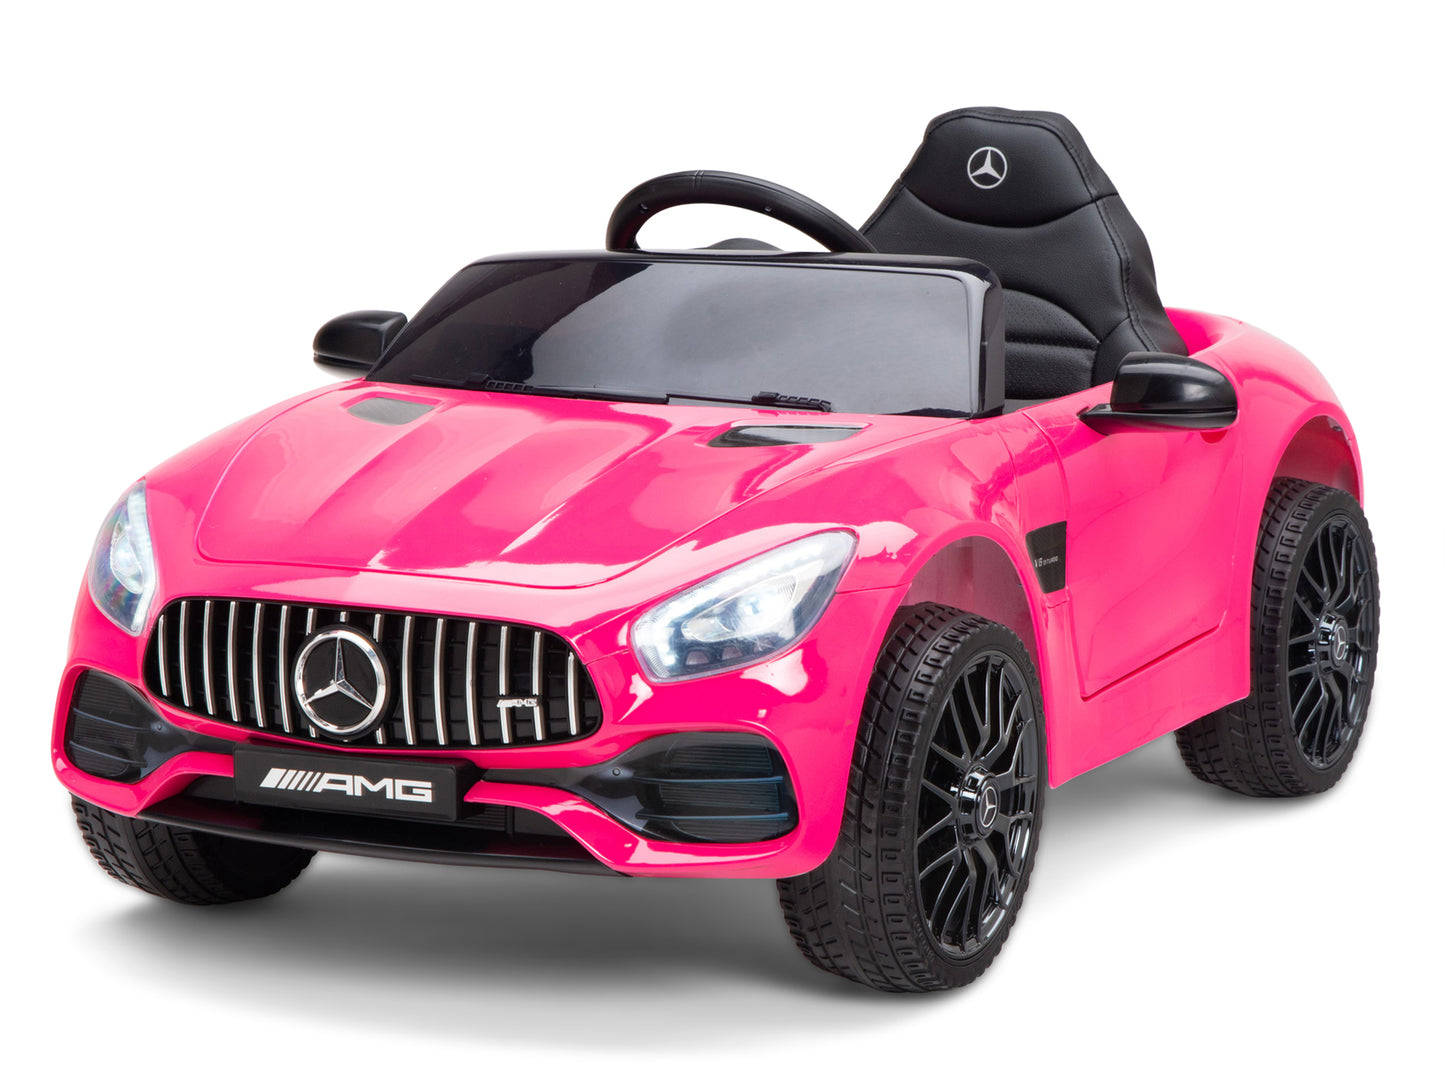 Mercedes-AMG GT Coupe 12V Battery Operated Ride On Car with Remote Control - Pink